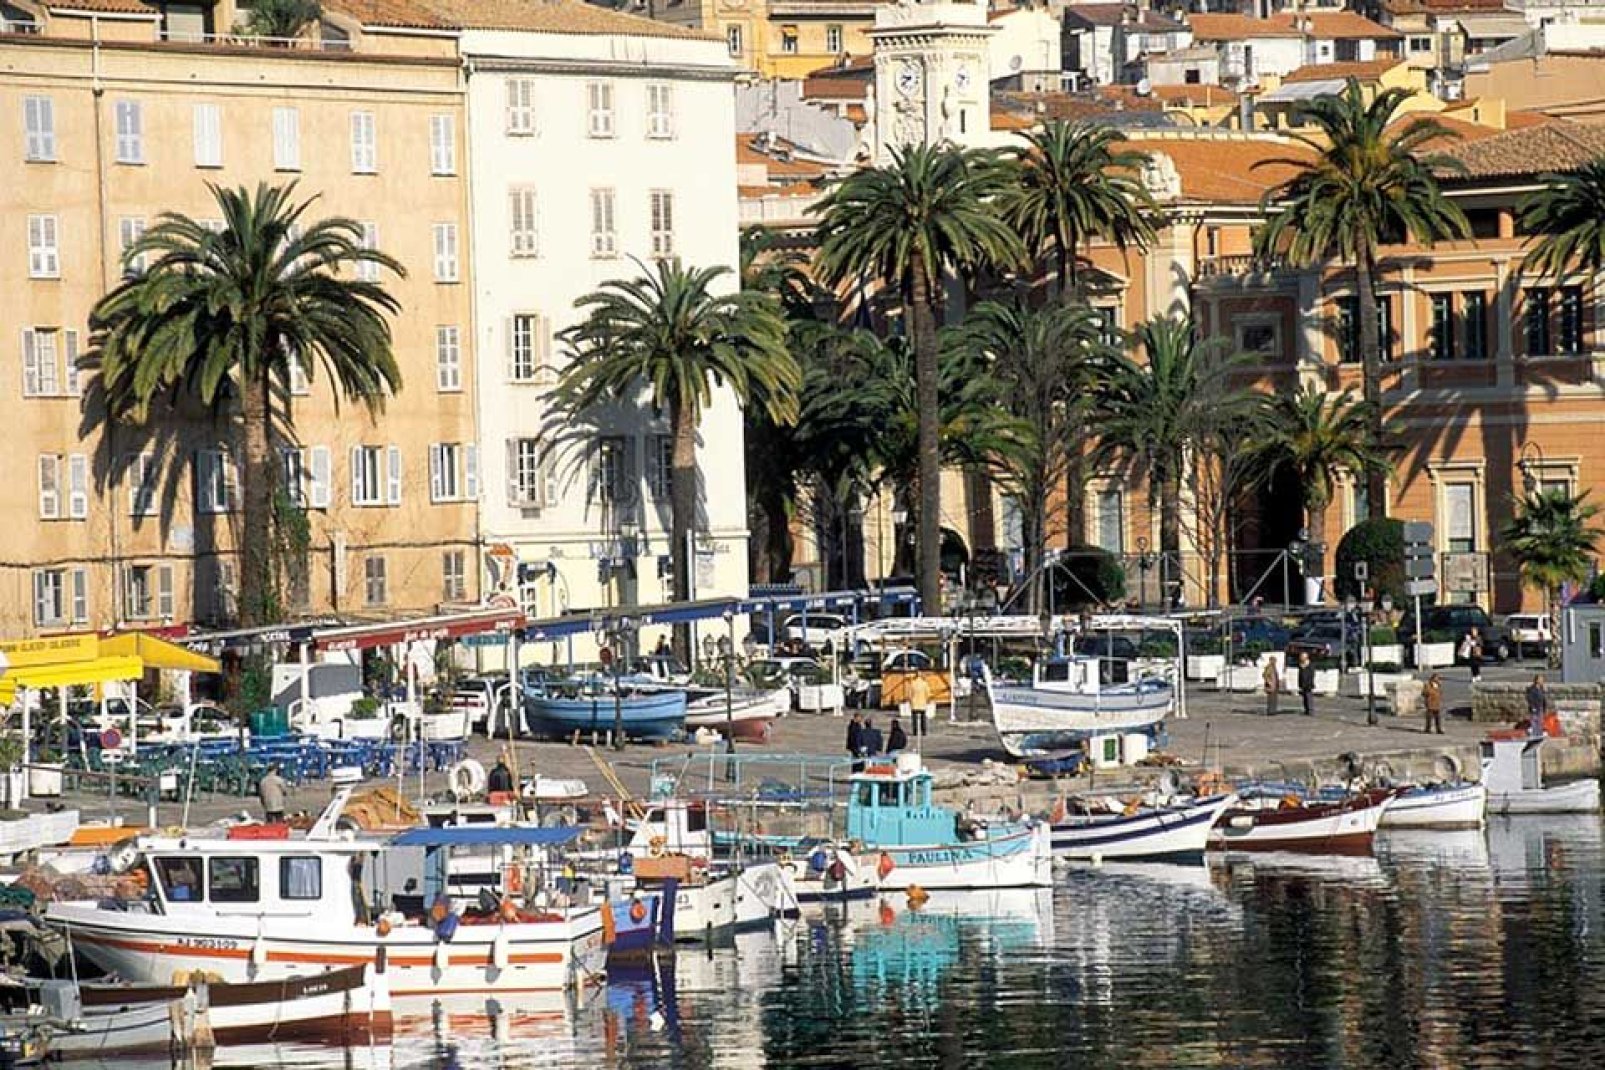 According to recent archaeological discoveries, Ajaccio has had a port since ancient times.